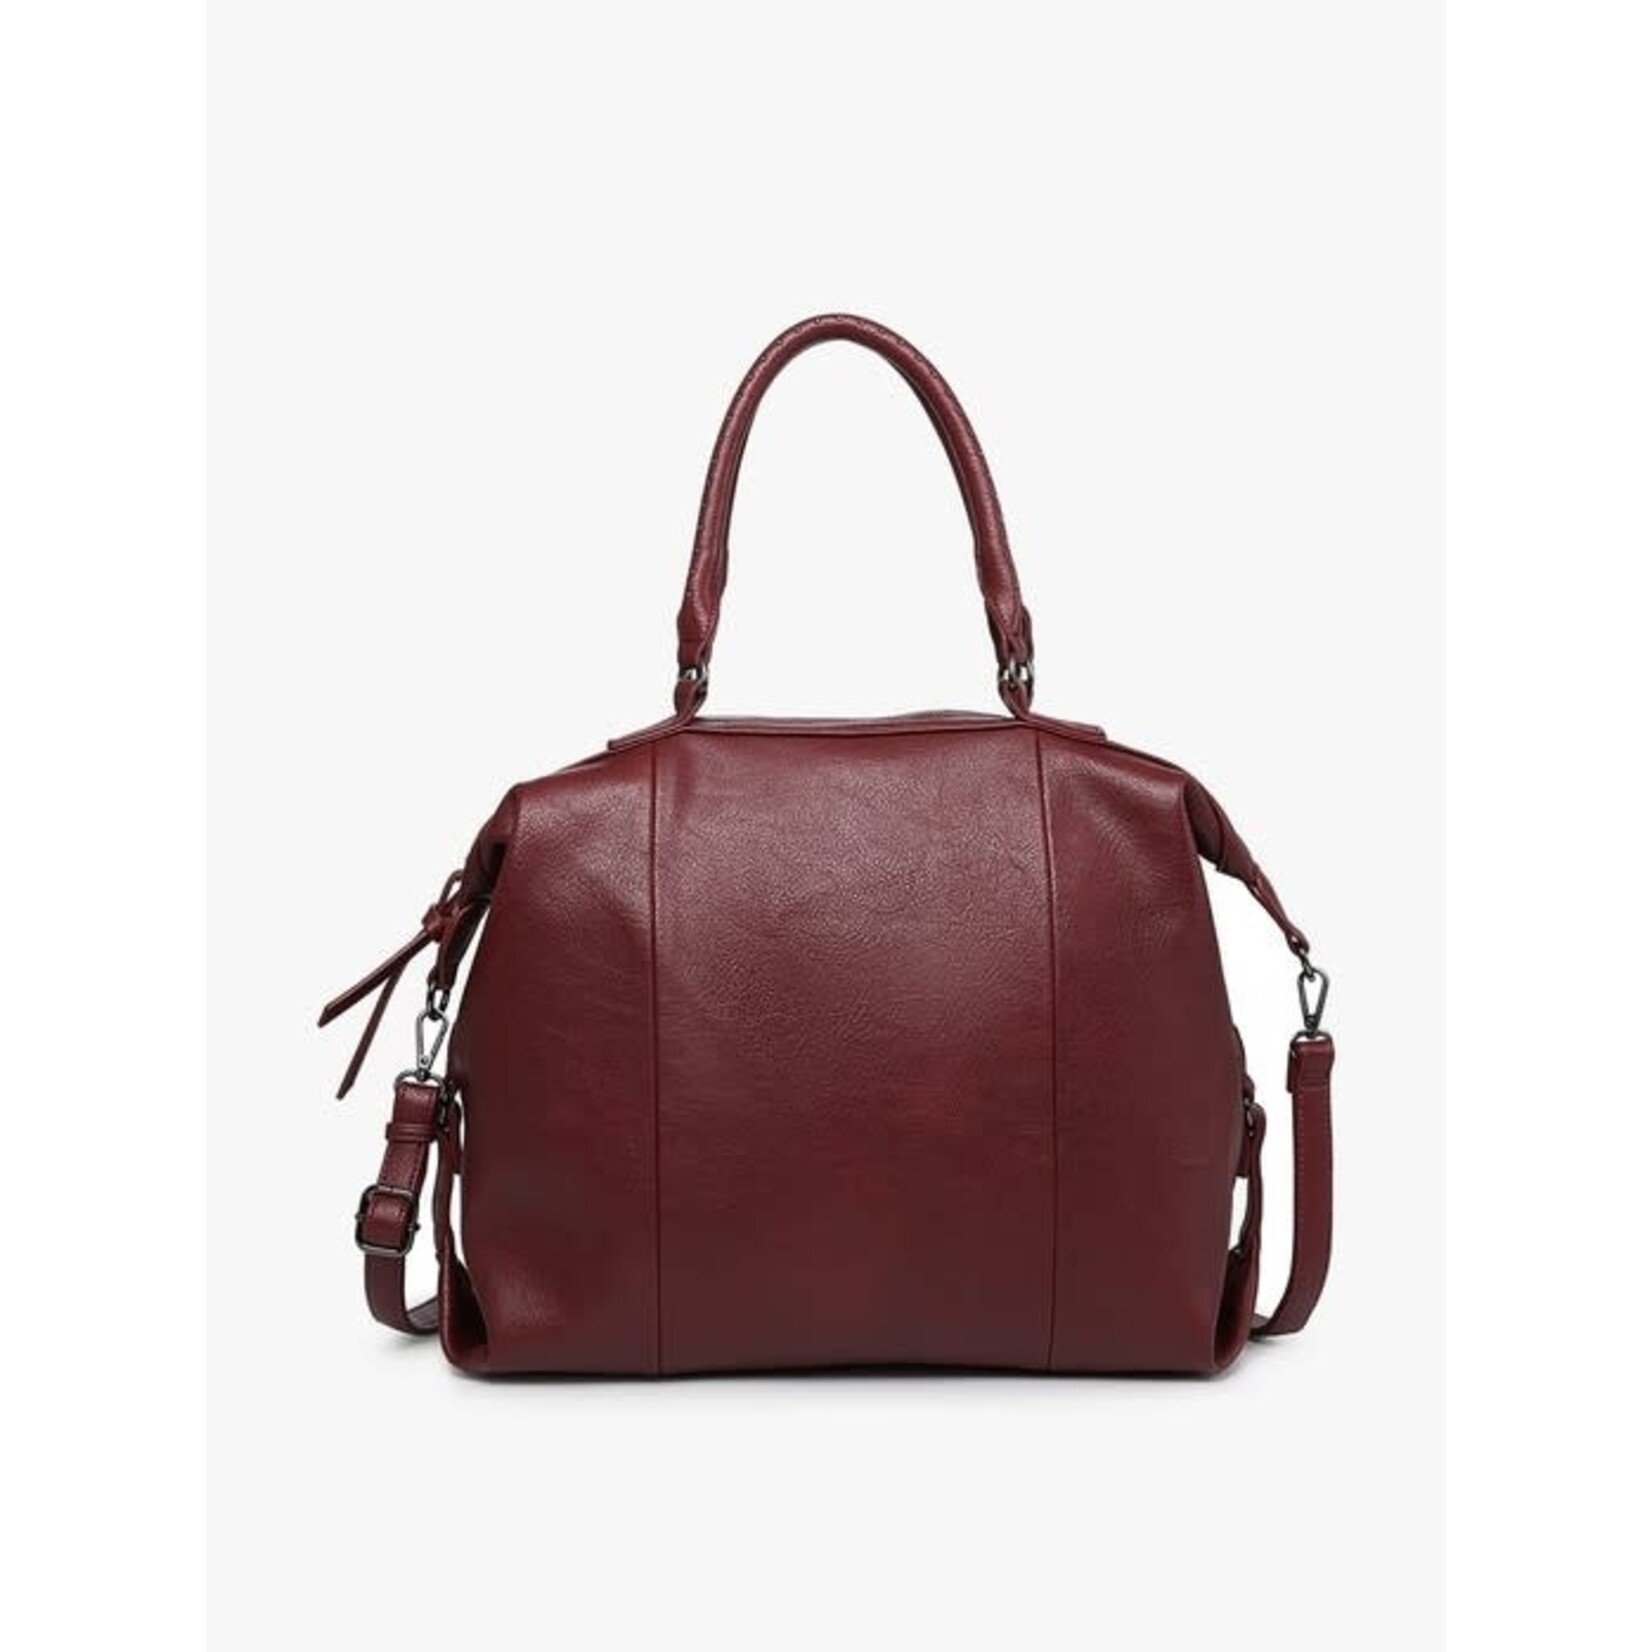 Jen & Co Indy Rustic Dual Handle Tote w/ Strap- Burgundy